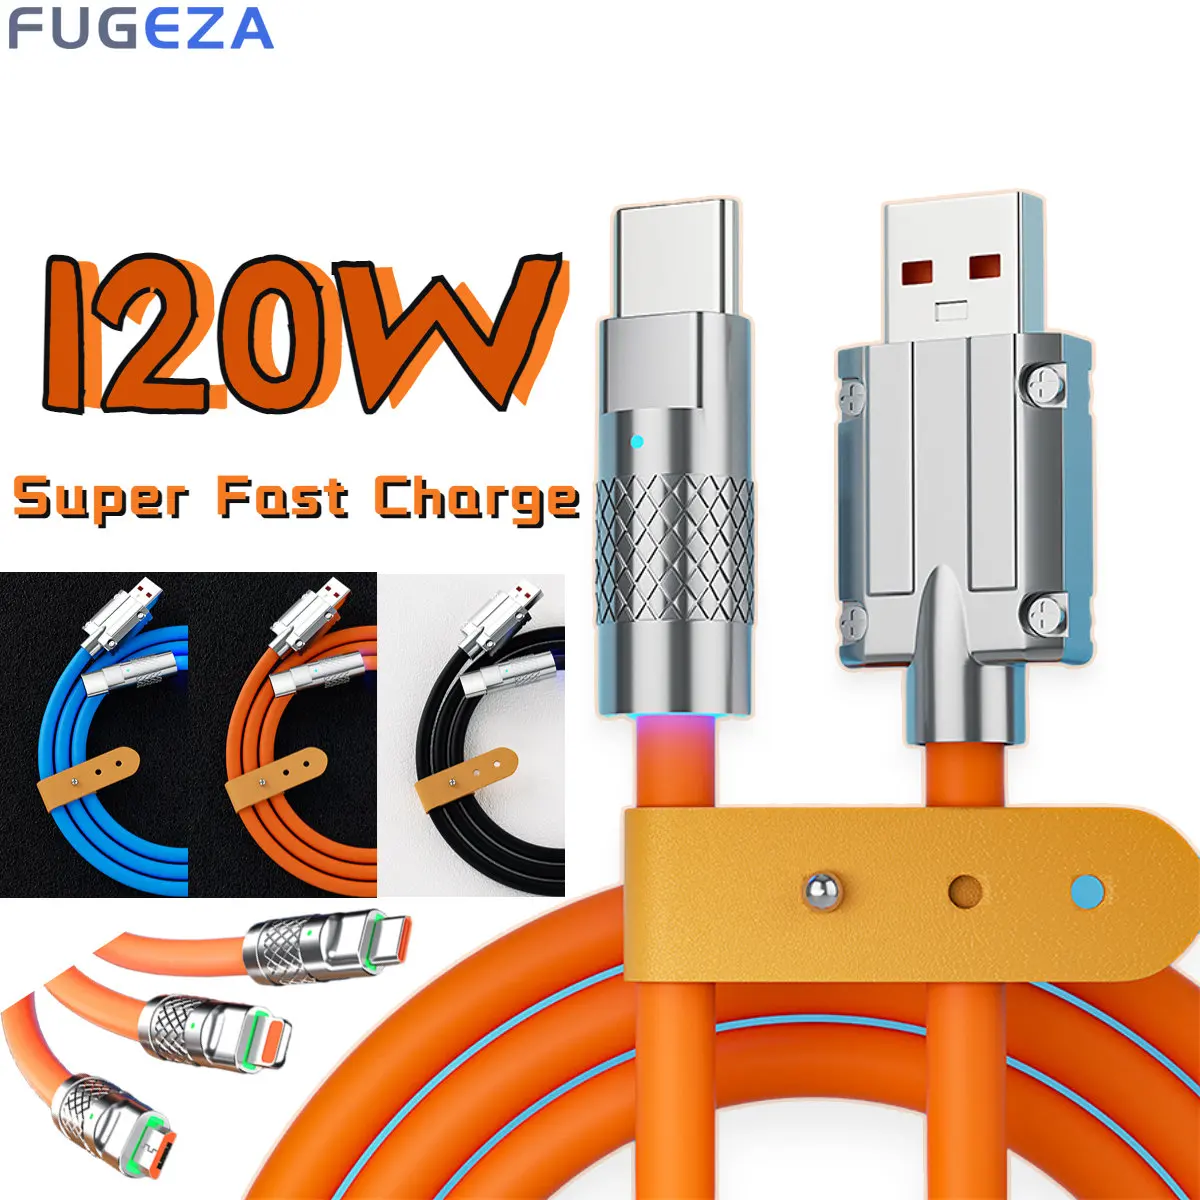 

FUGEZA 120W 6A Super Fast Charge Liquid Zinc Alloy Cable Type-C Silicone USB Cable For Xiaomi Huawei Samsung Data Line